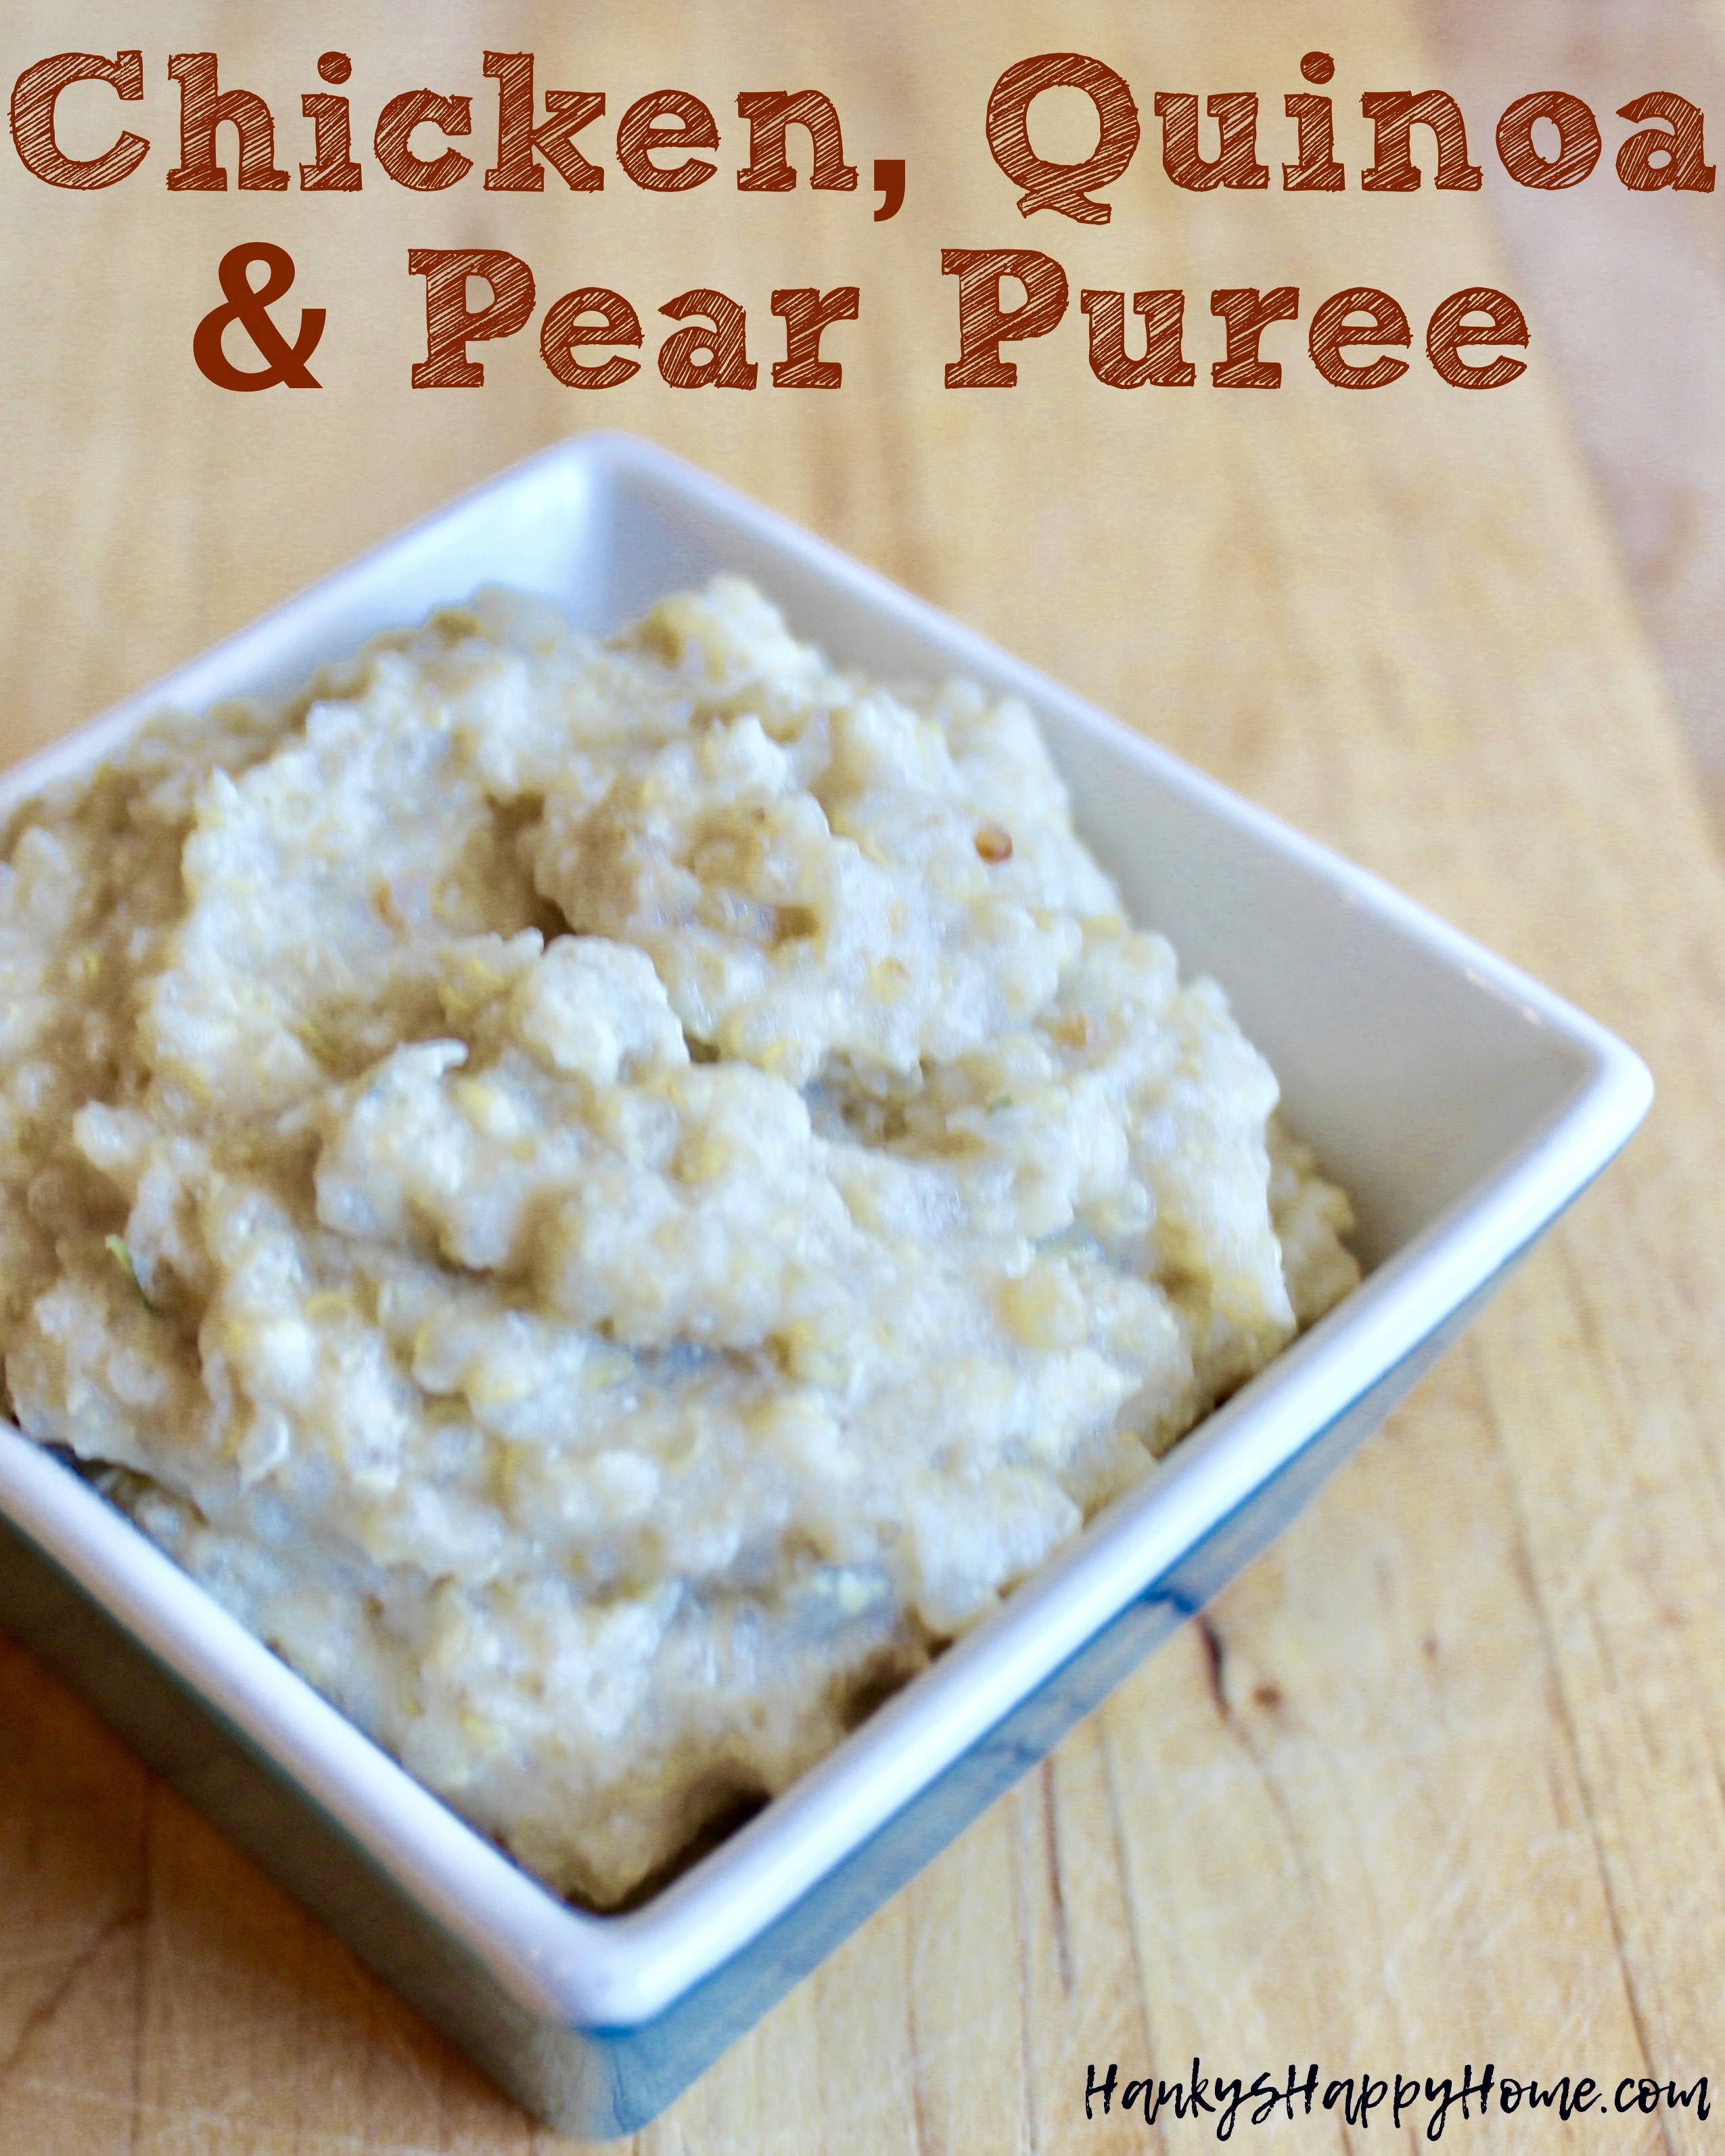 This Chicken, Quinoa & Pear Baby Food Puree is easy to make and packed with protein, iron, and fiber. Perfect lunch or dinner for baby.